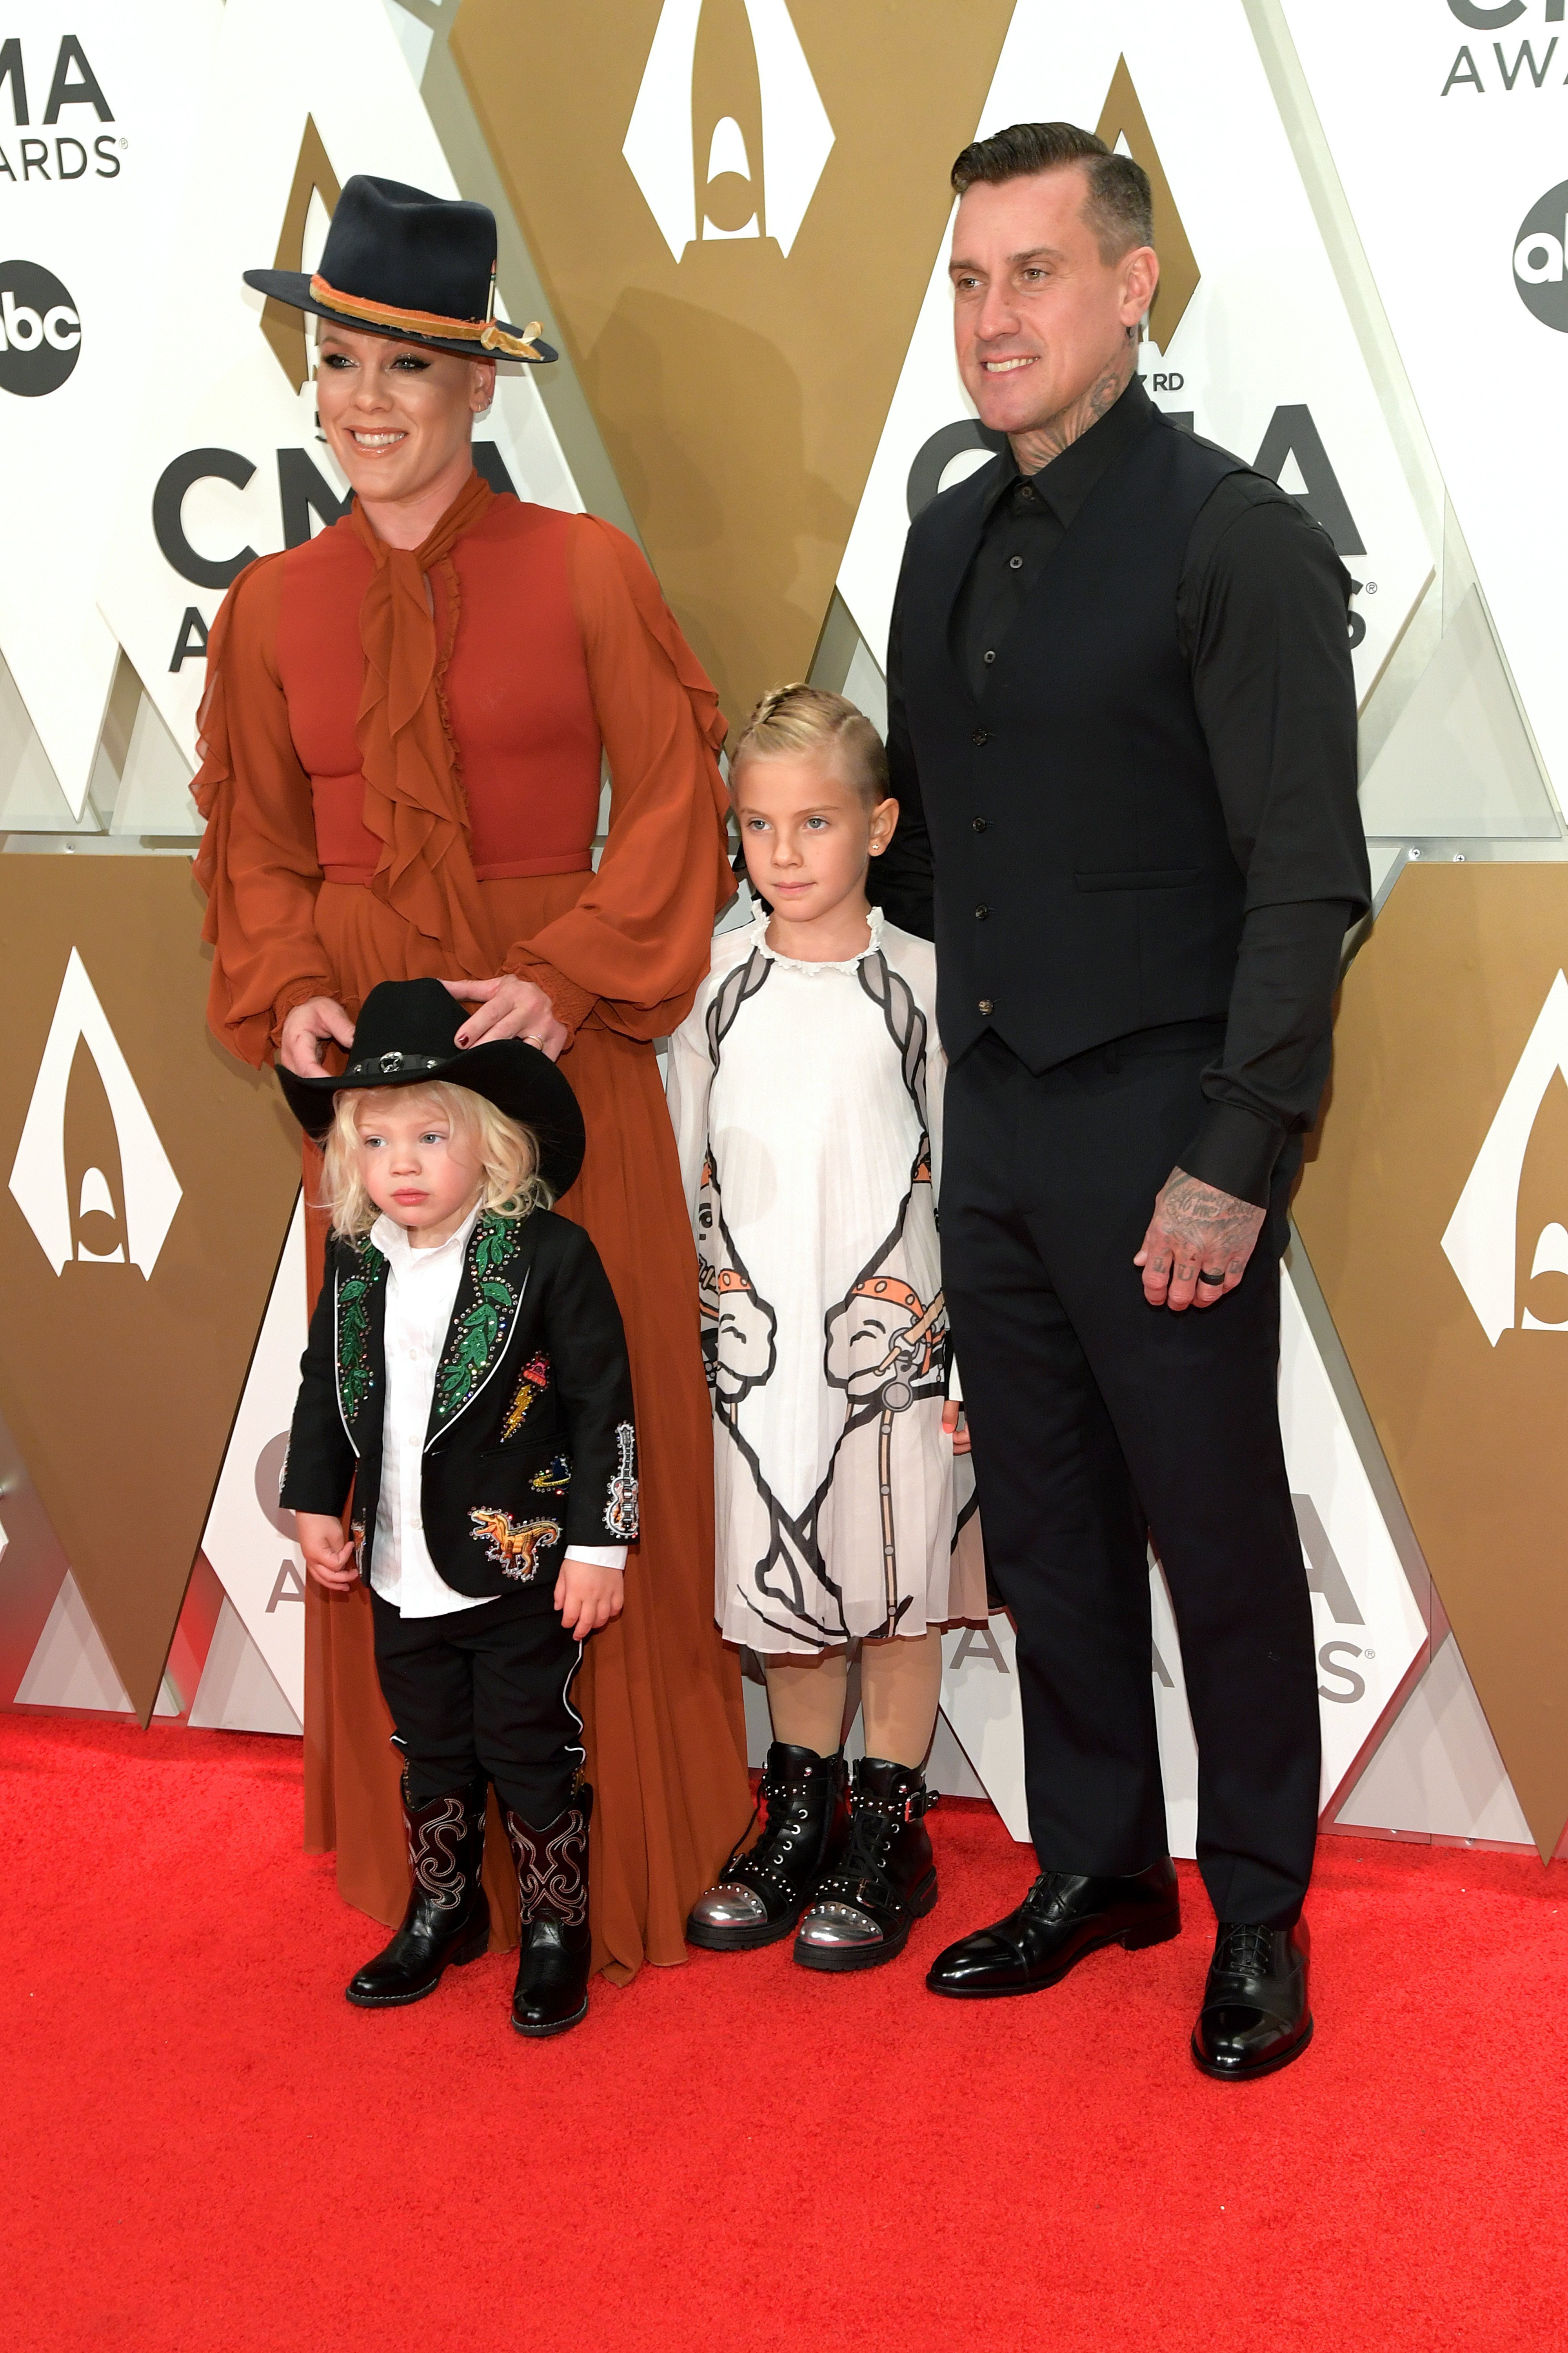 Jameson Hart, Willow Hart, P!nk and Carey Hart attend the 53rd annual CMA Awards at the Music City Center on November 13, 2019, in Nashville, Tennessee. | Photo: Getty Images.